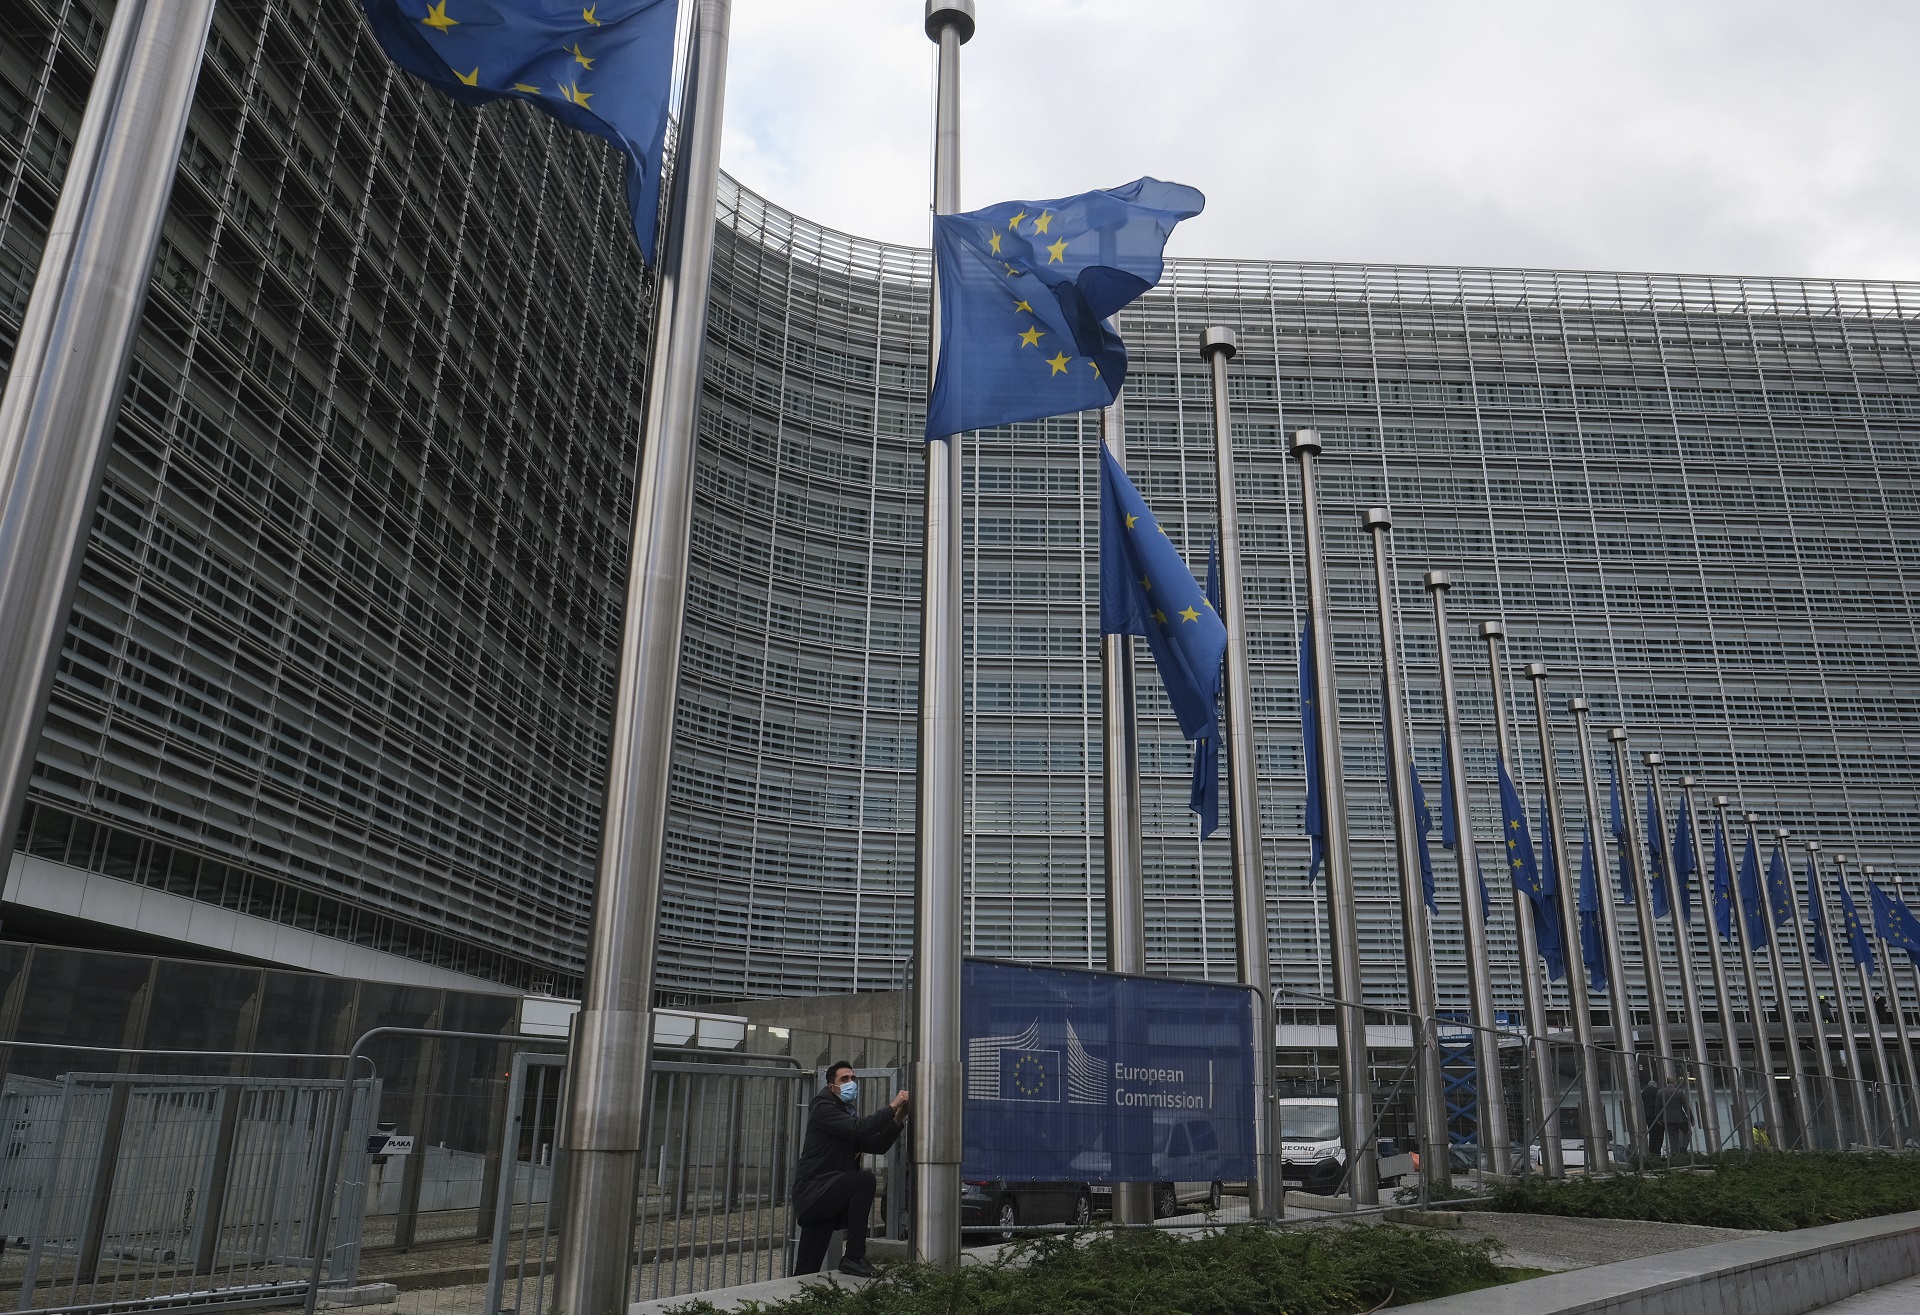 epa08795173 European Union flags fly at half-mast in front of European Commission headquarters following Vienna terrorist attack, Brussels, Belgium, 03 November 2020. According to recent reports, at least two persons are reported to have died and many are seriously injured in what officials treat as a terror attack which took place in the evening of 02 November.  EPA/OLIVIER HOSLET